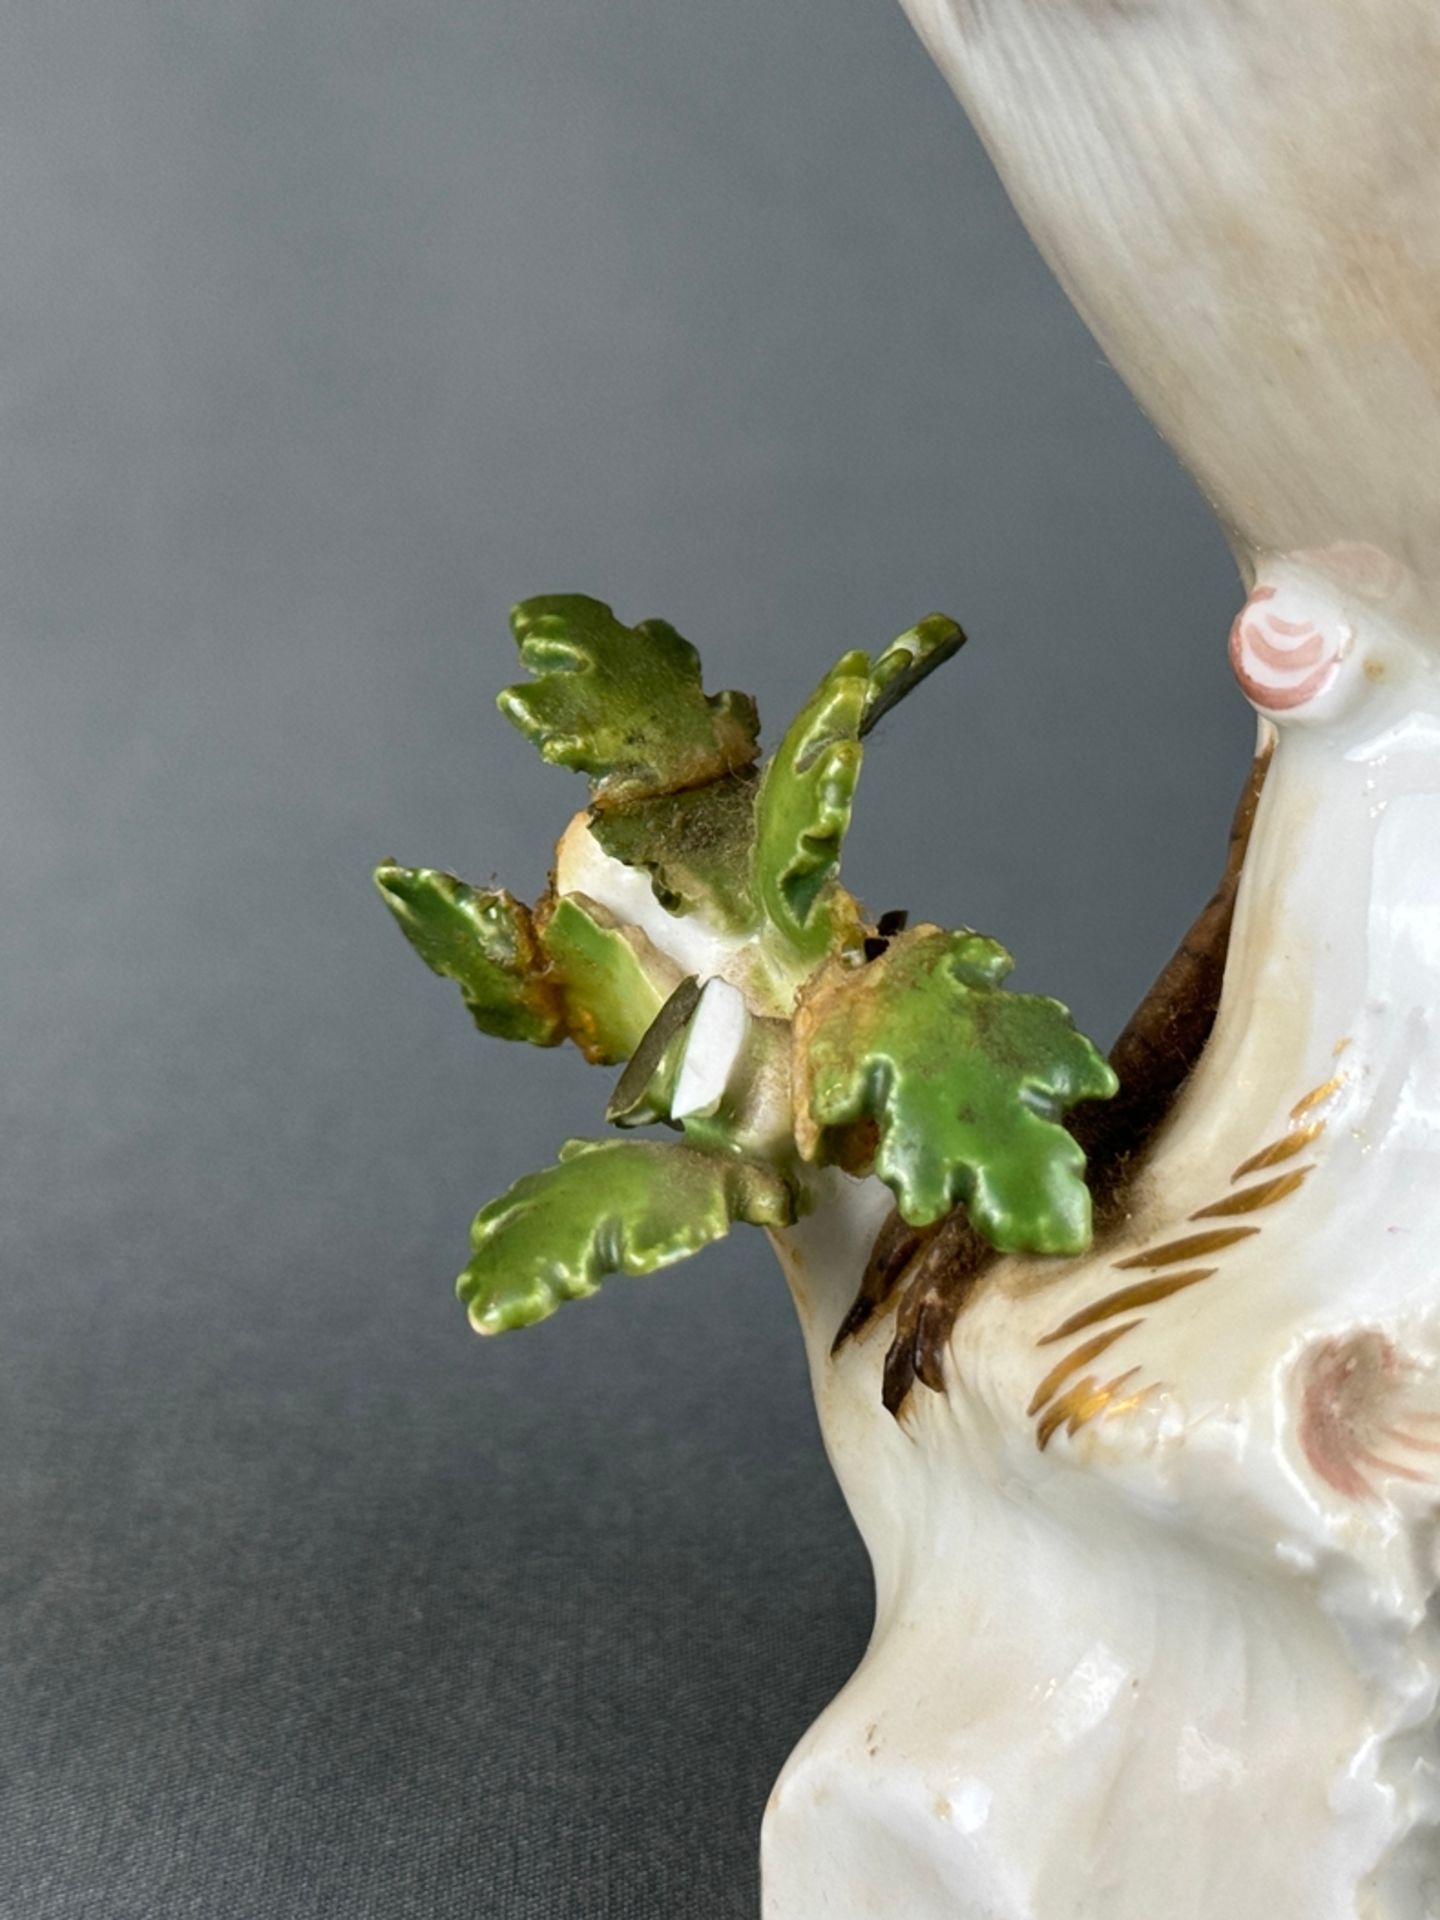 Porcelain figurine "Sparrow" Meissen sword mark, sparrow sitting on a branch base, with leaves, und - Image 5 of 5